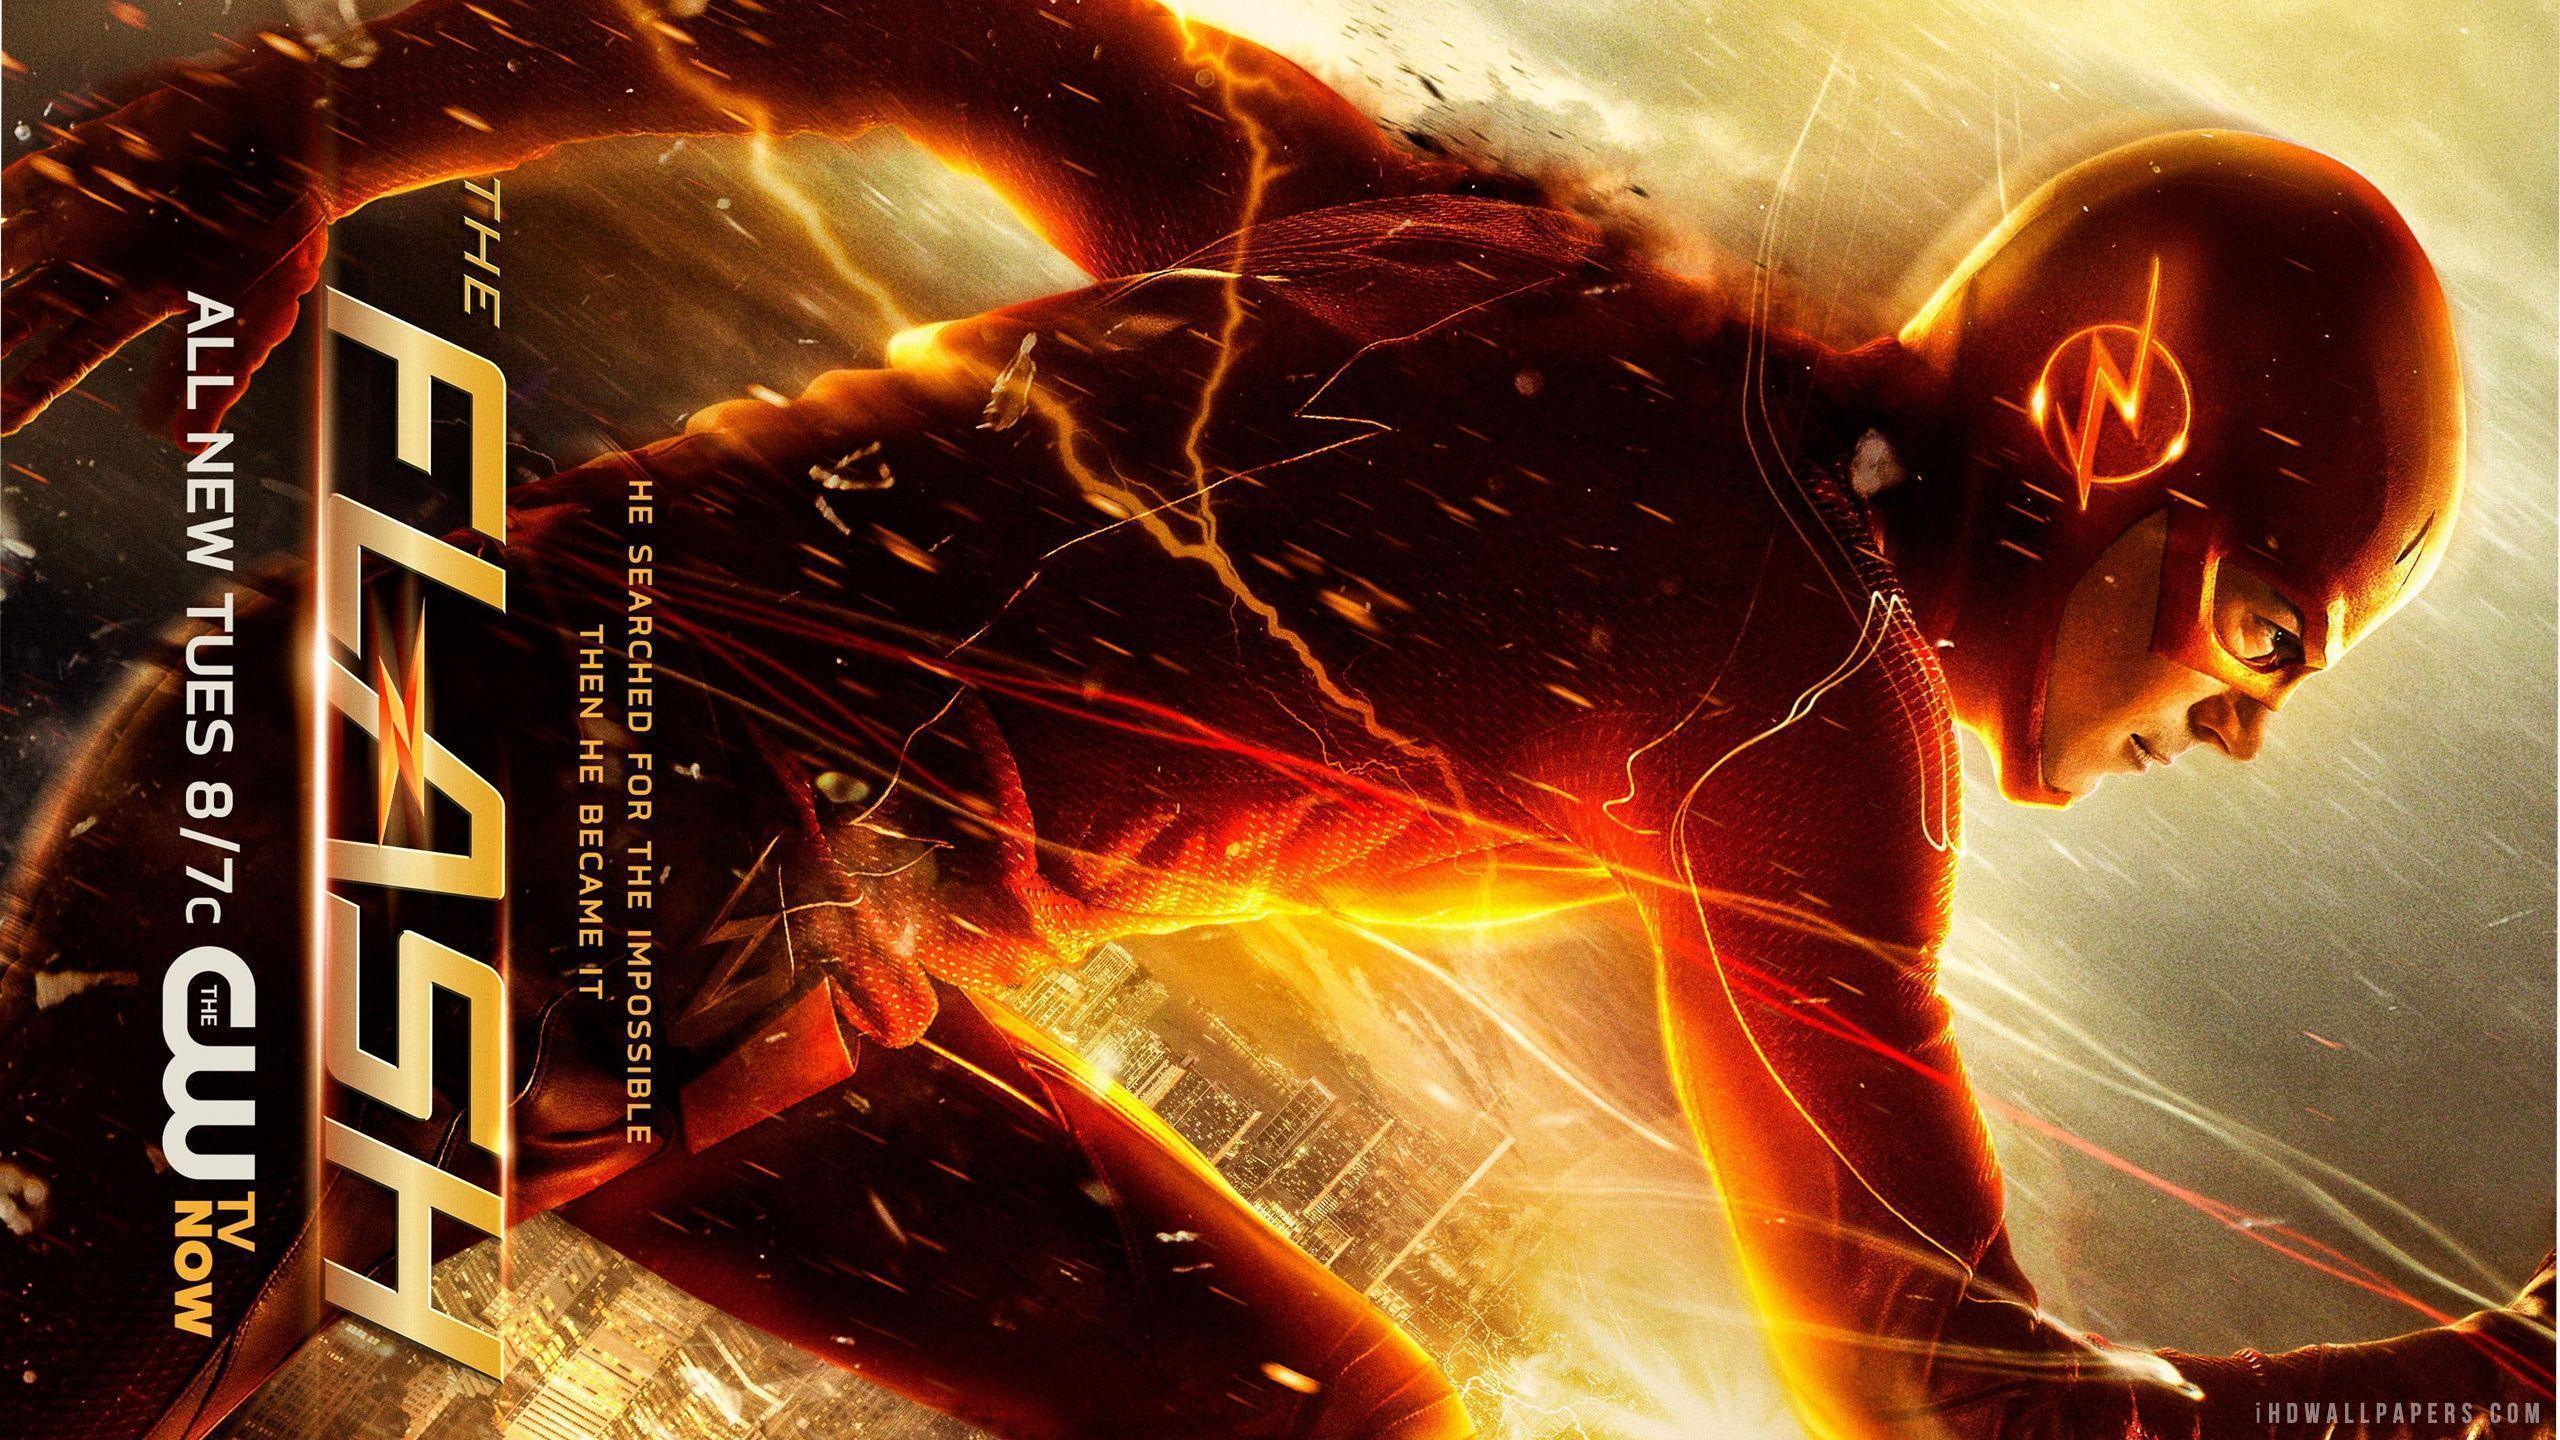 The Flash TV Wallpaper High Resolution and Quality Download